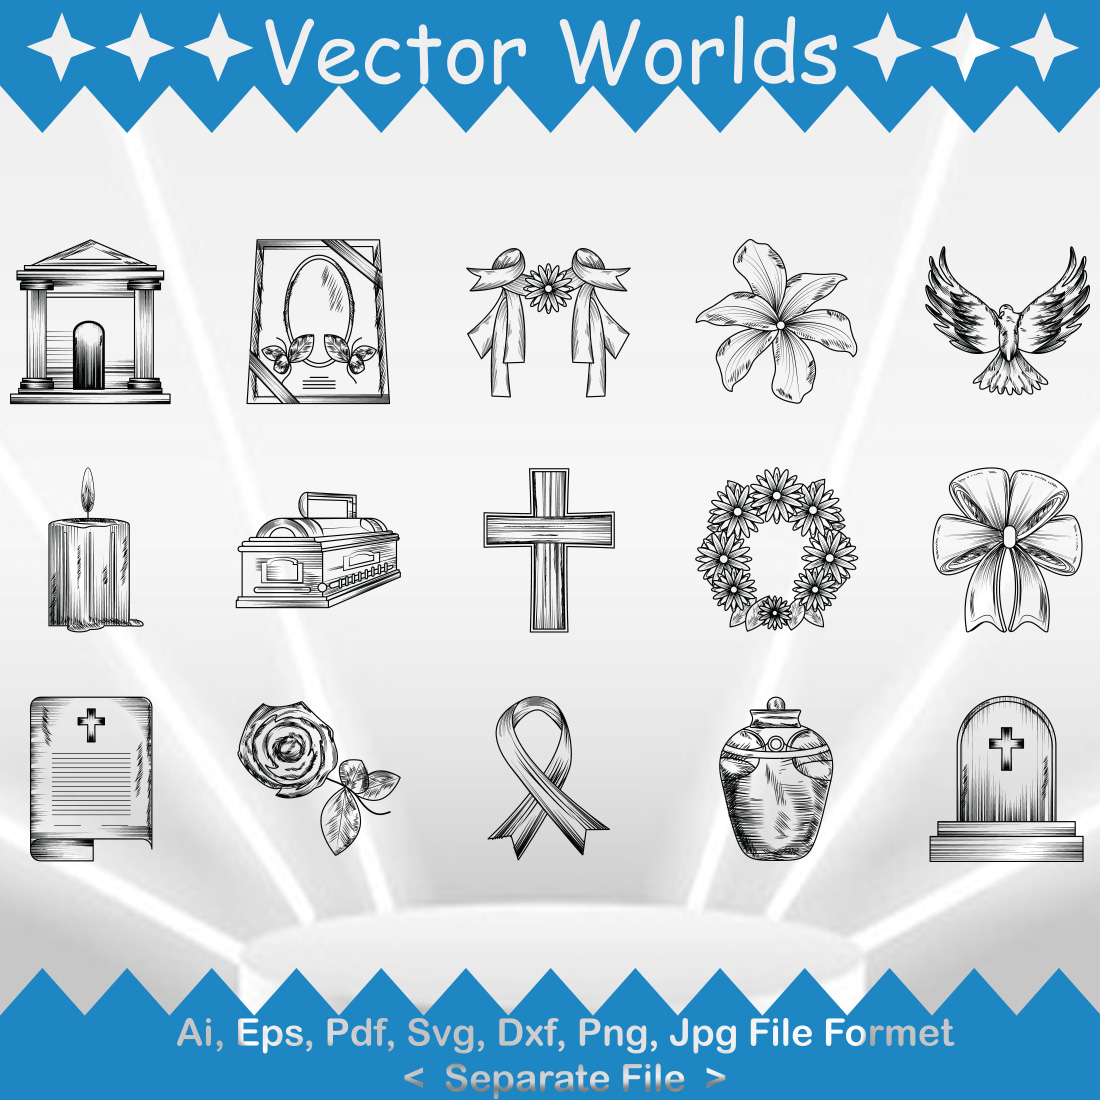 Rest In Peace SVG Vector Design cover image.